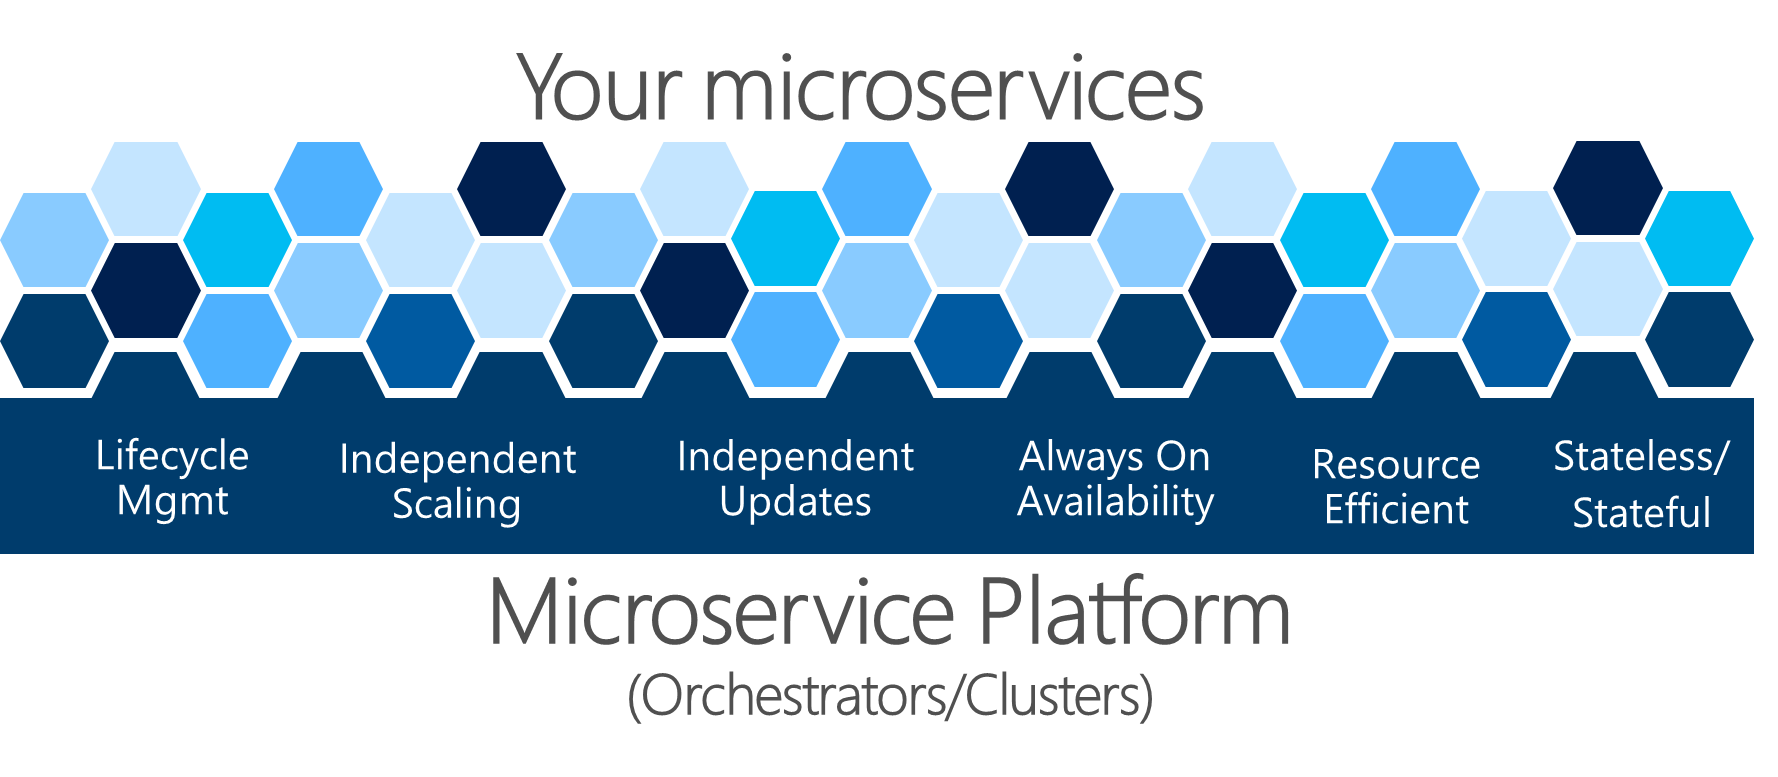 Diagram of clusters supplying a support platform for microservices.